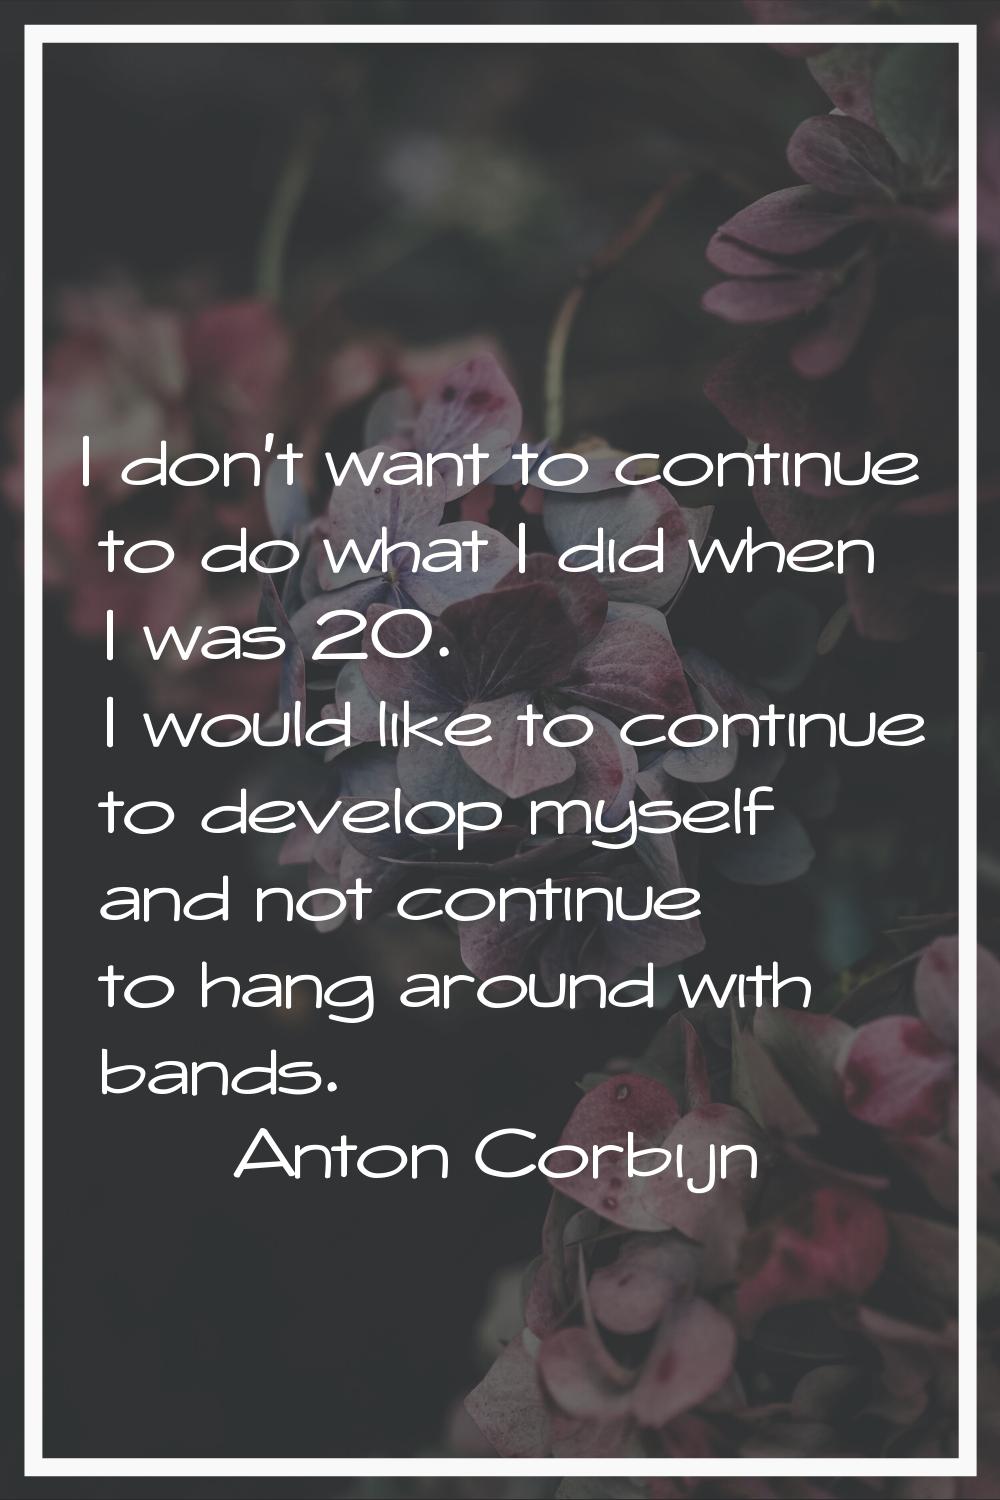 I don't want to continue to do what I did when I was 20. I would like to continue to develop myself